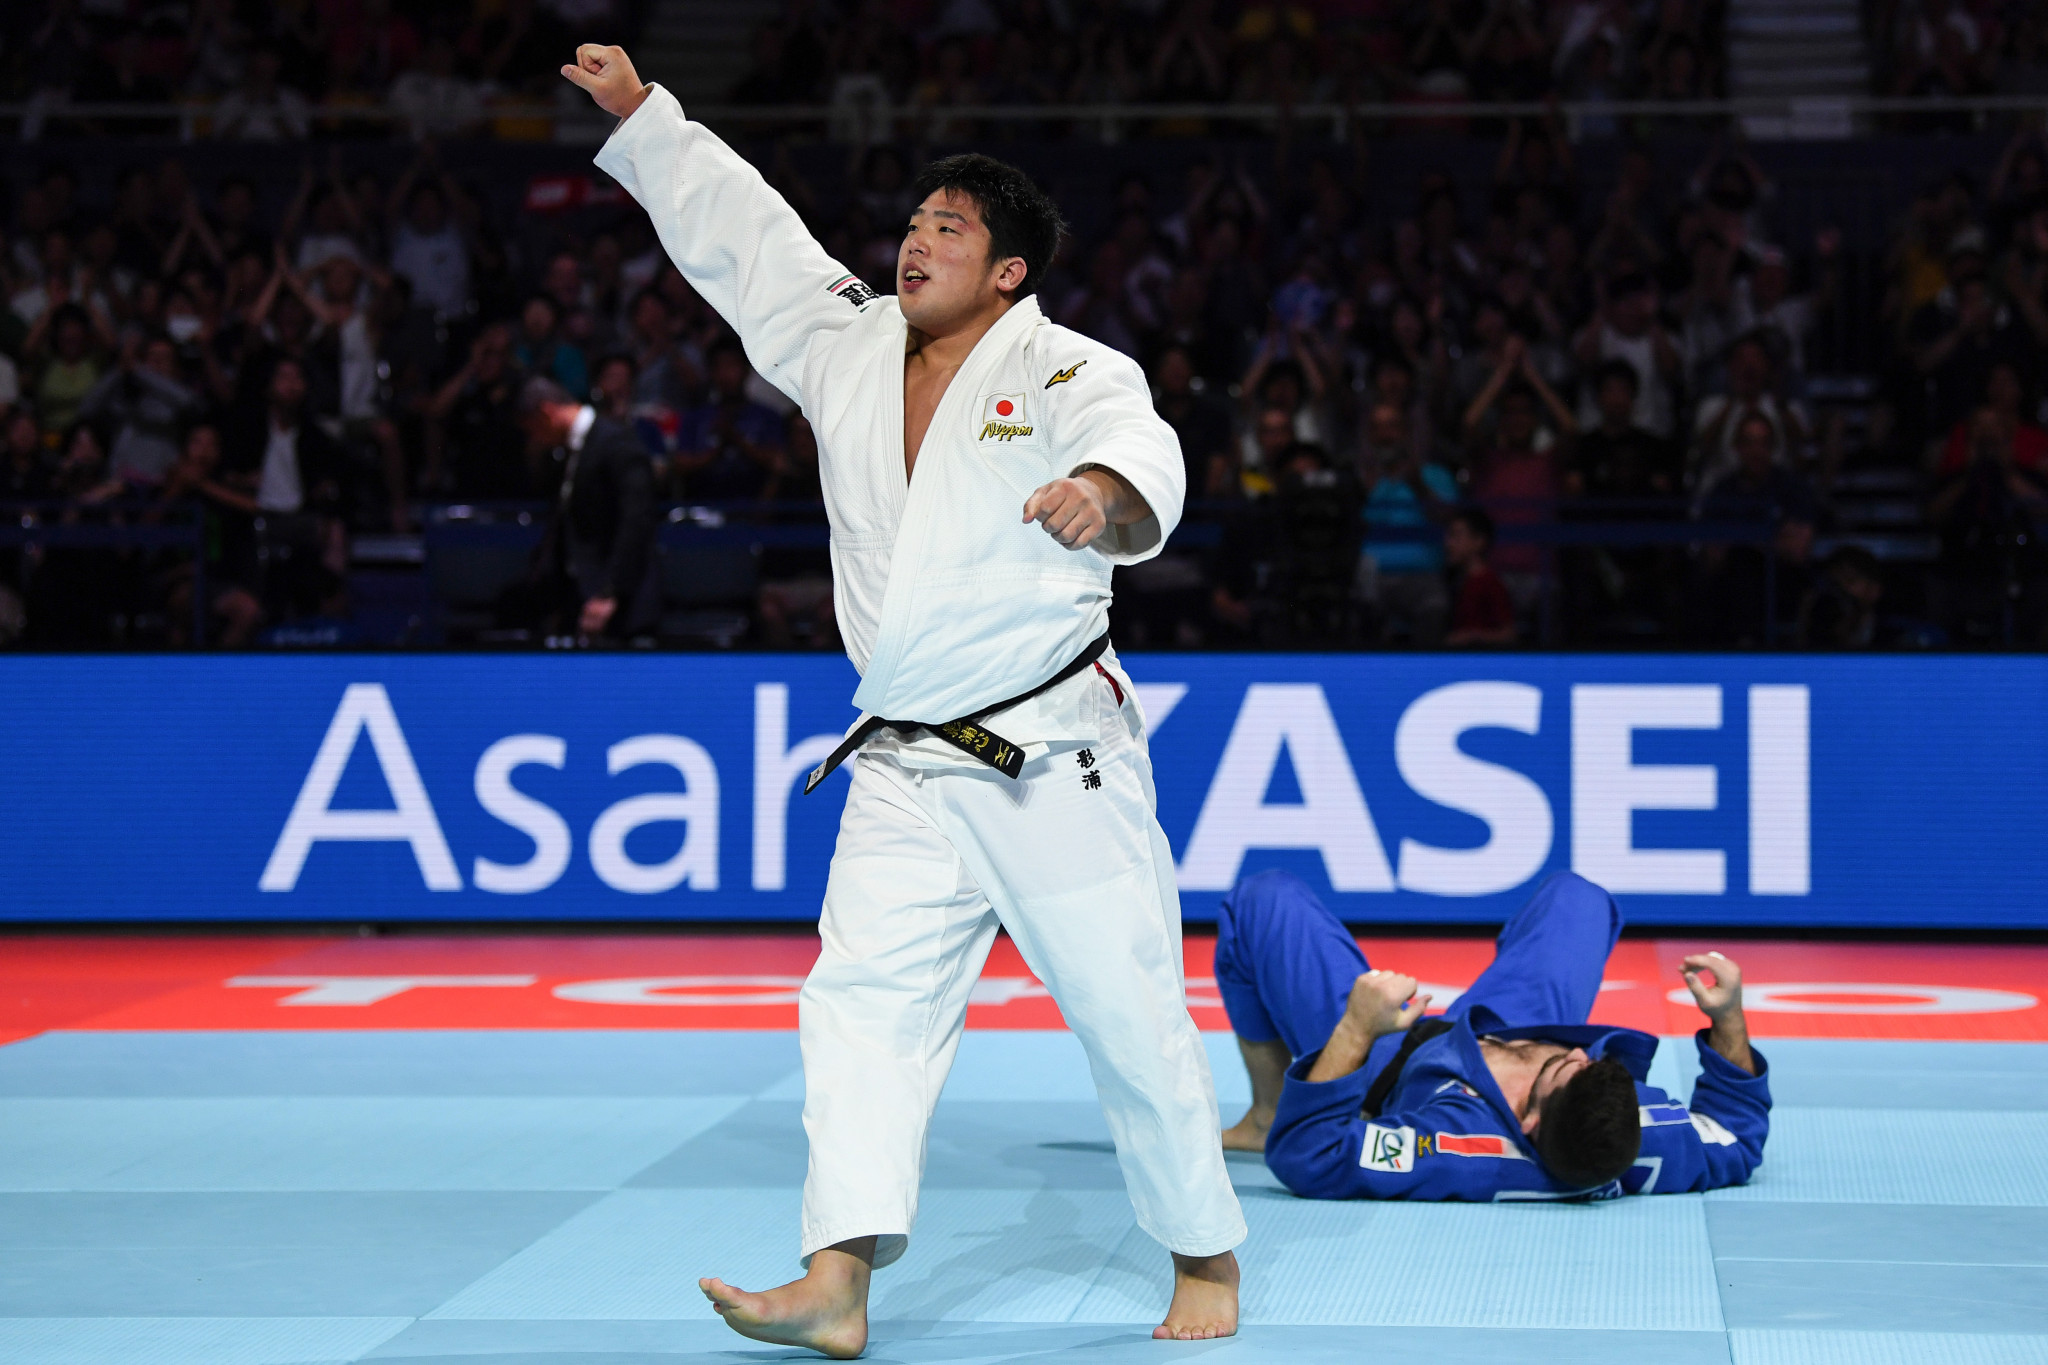 The Asian-Oceania Judo Championships in 2021 will be held in Kyrgyzstan ©Getty Images